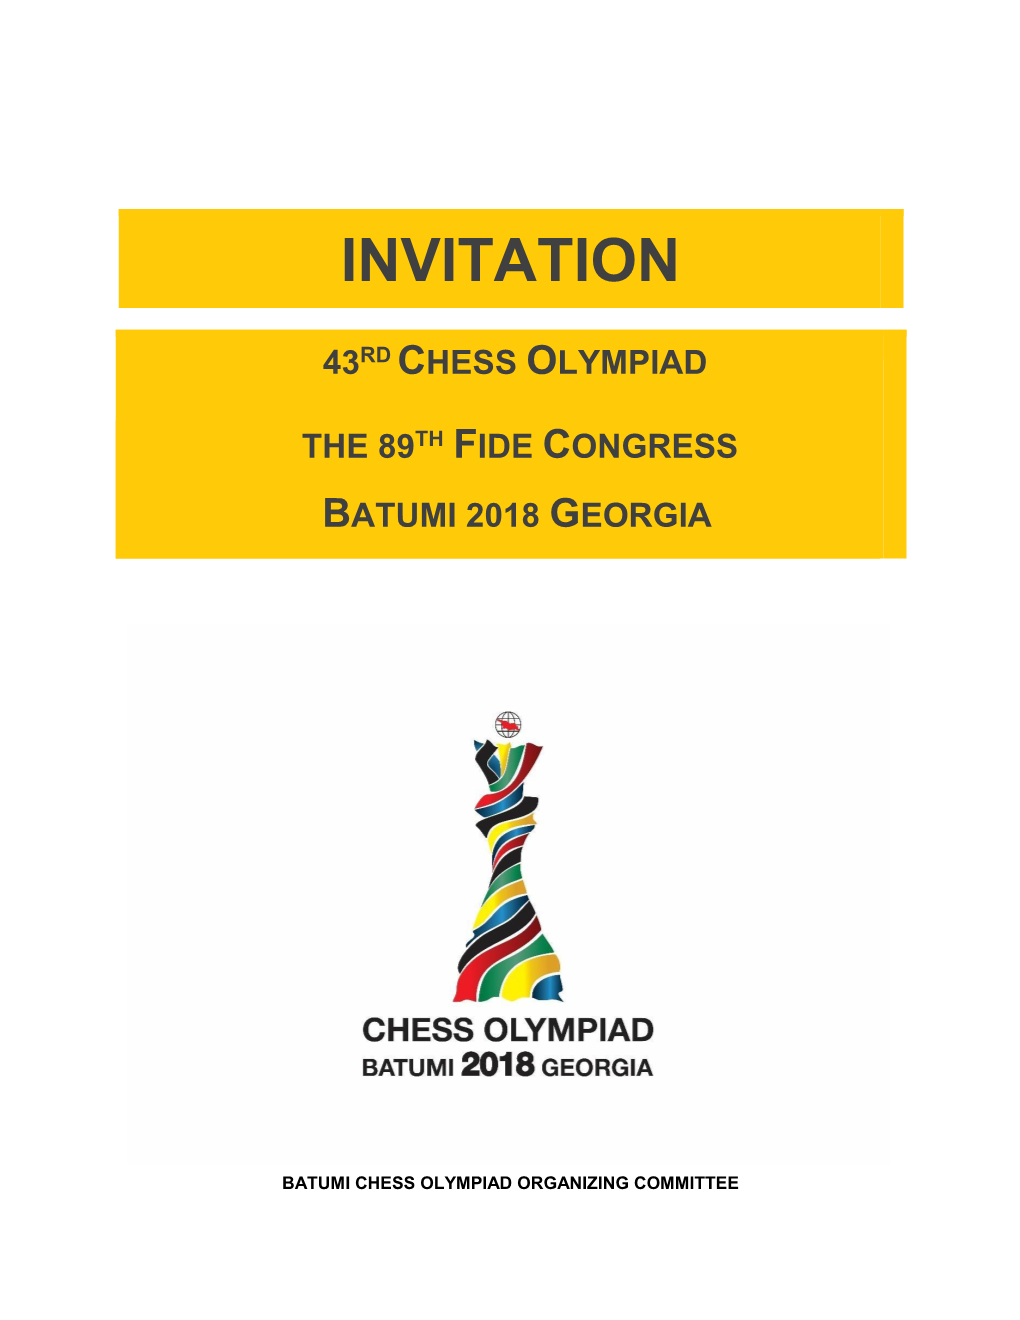 Invitation for the 43Rd Chess Olympiad and 89Th